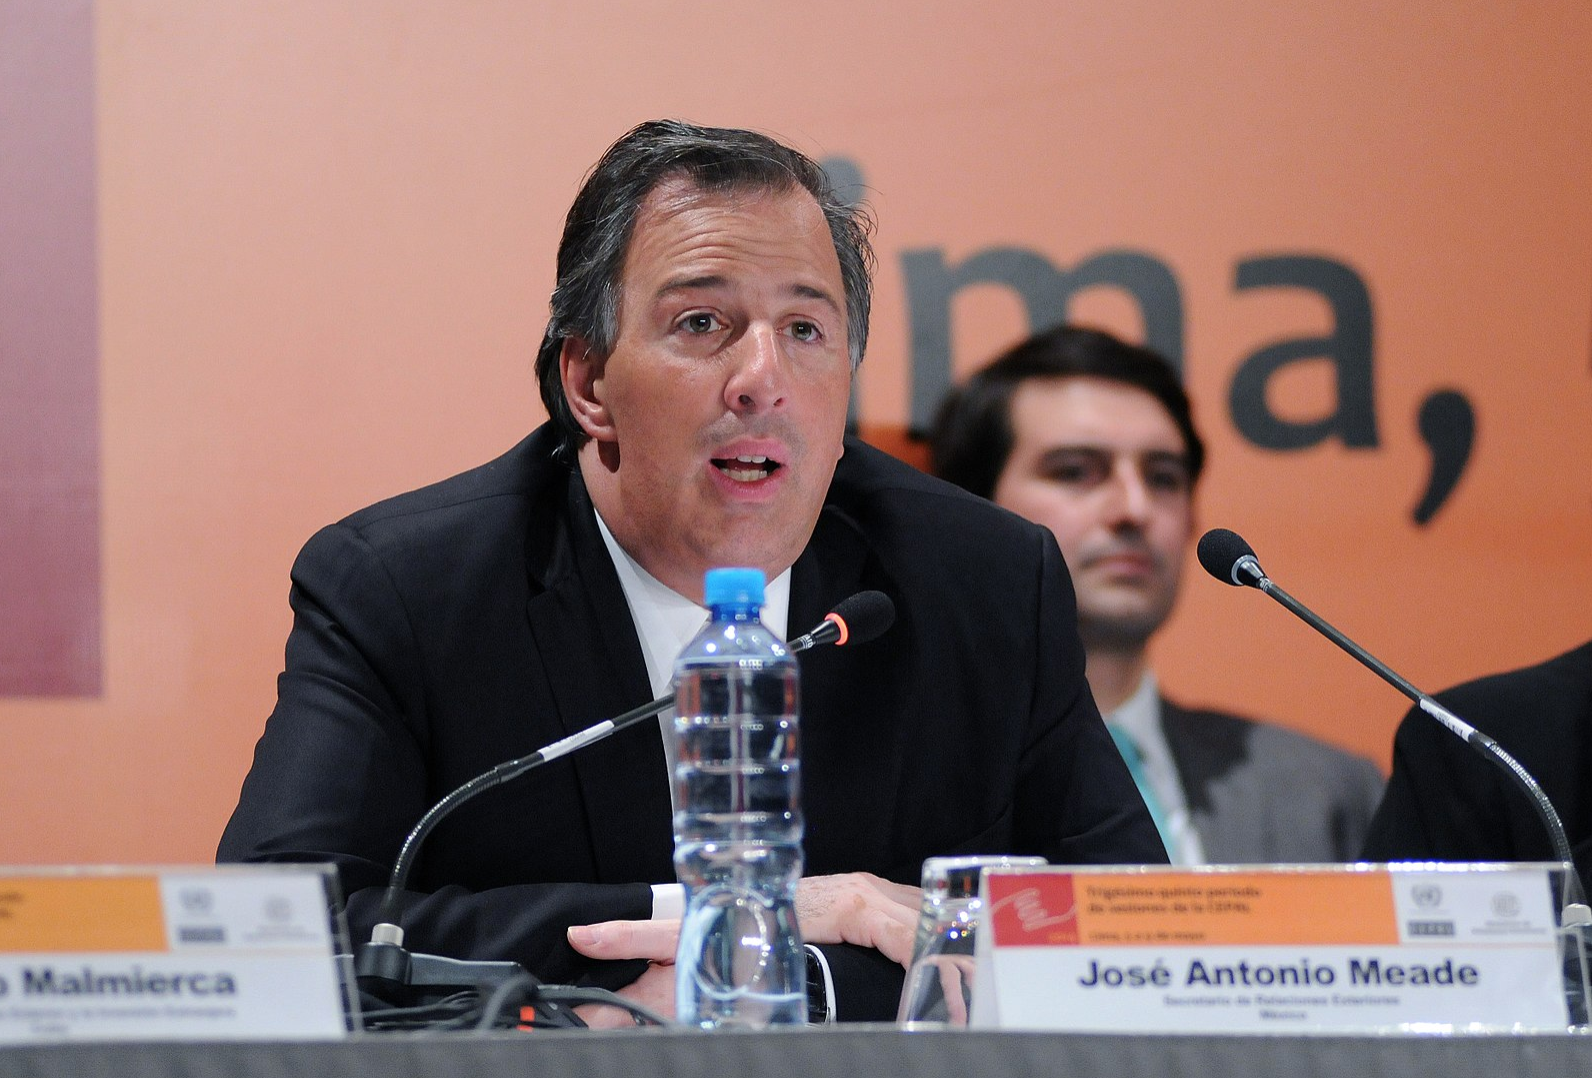 Meade was working as Mexico's Foreign Minister during the thirty-fifth session of the Economic Commission for Latin America and the Caribbean (ECLAC) in 2014. Image credit: Wikicommons/Daniel Malpica